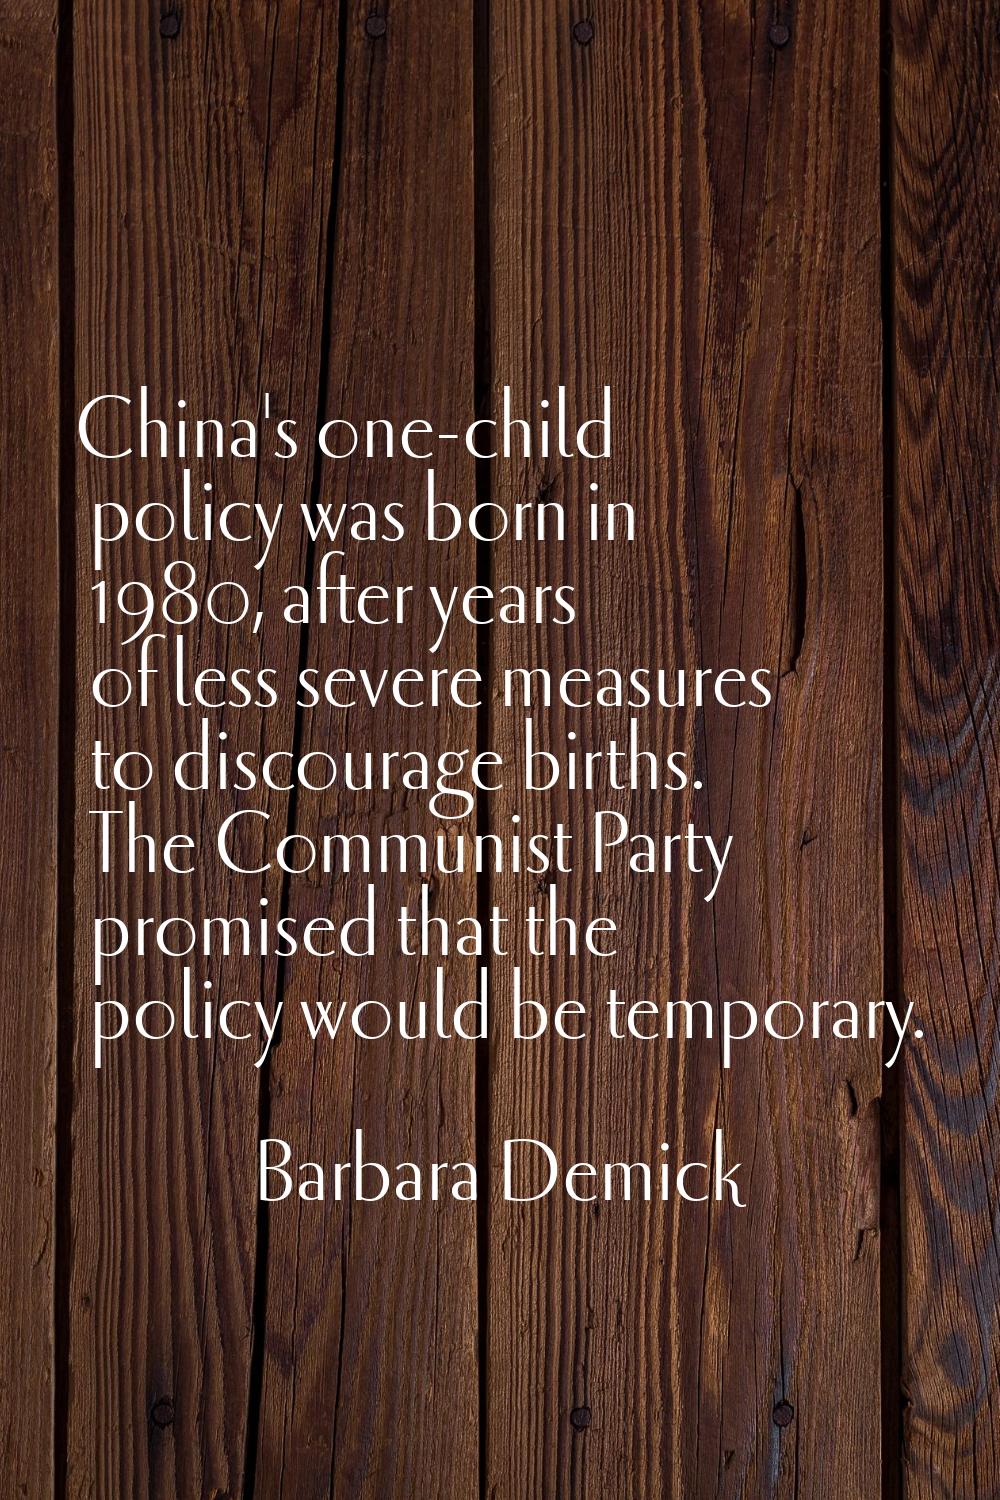 China's one-child policy was born in 1980, after years of less severe measures to discourage births